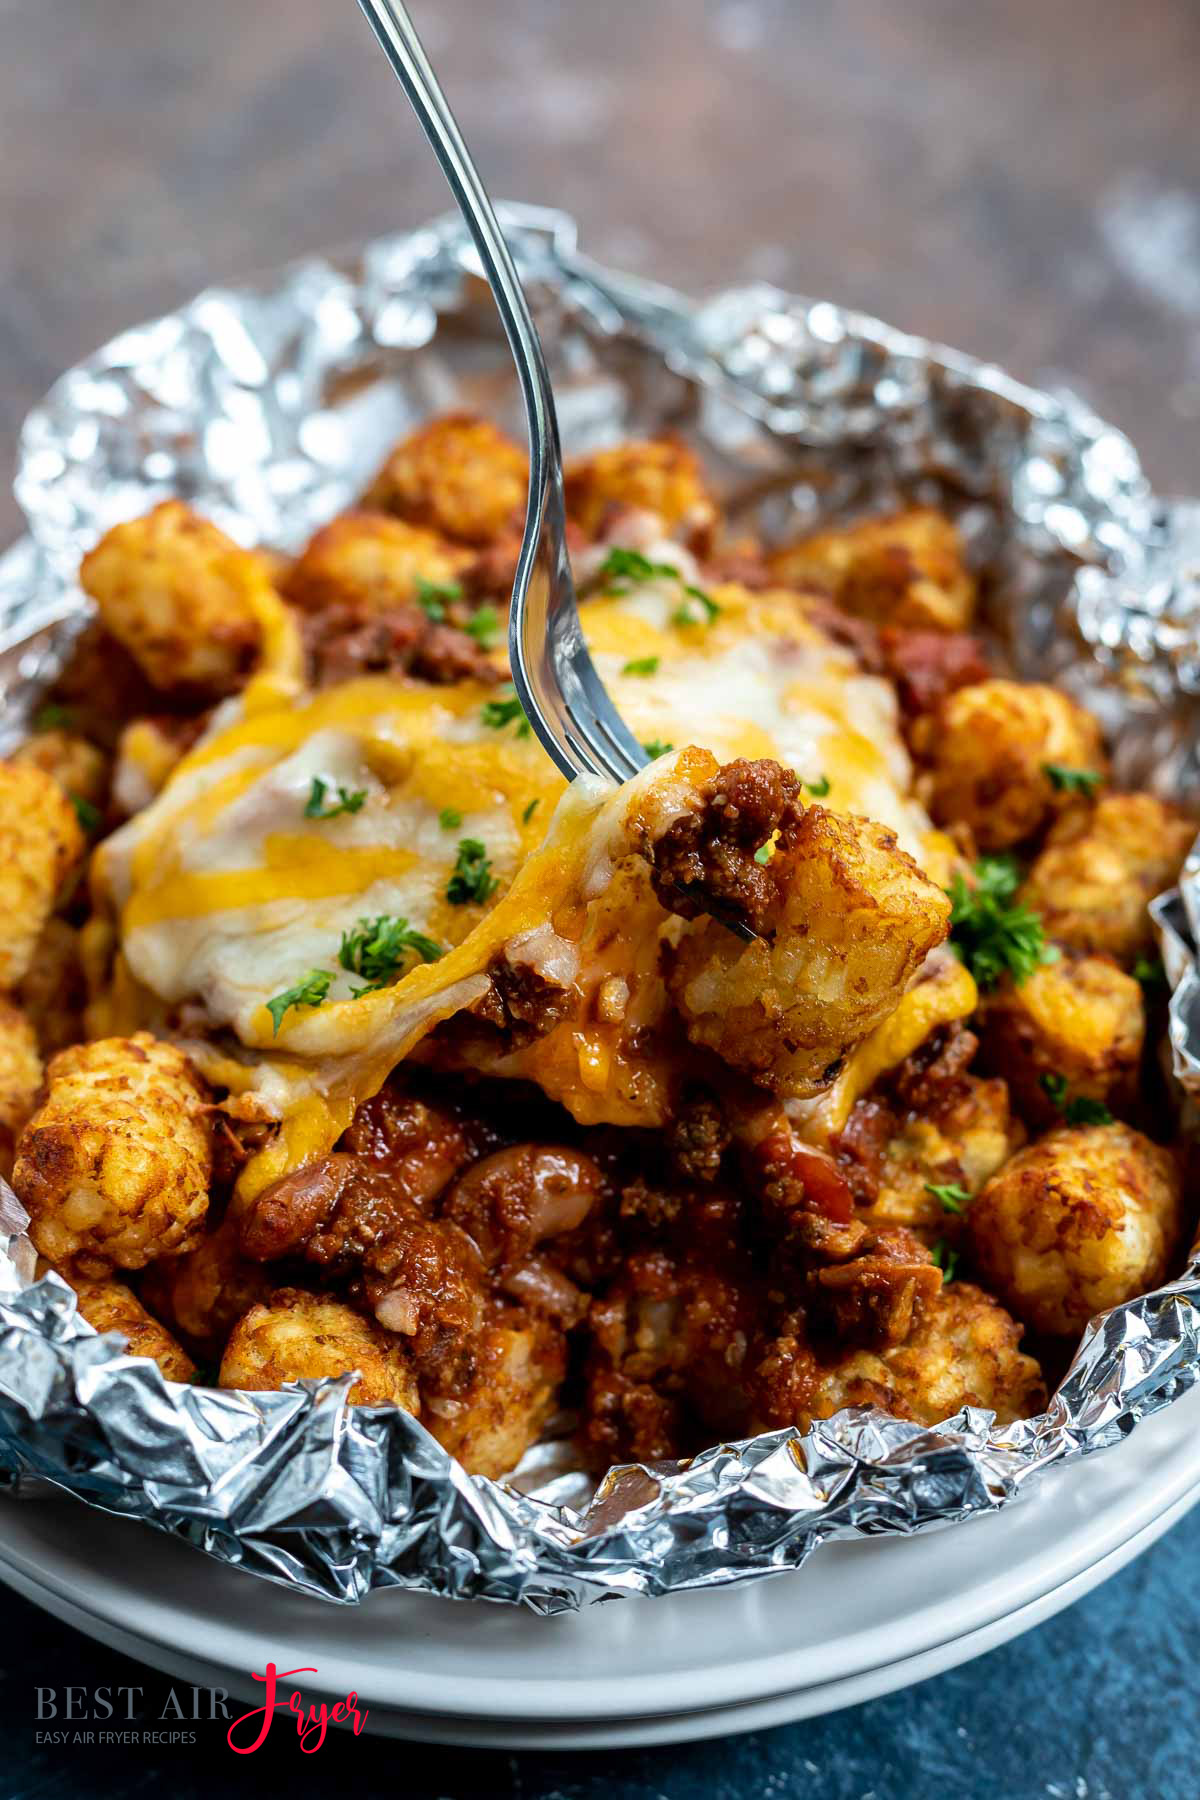 Chili Cheese Air Fryer Tater Tots